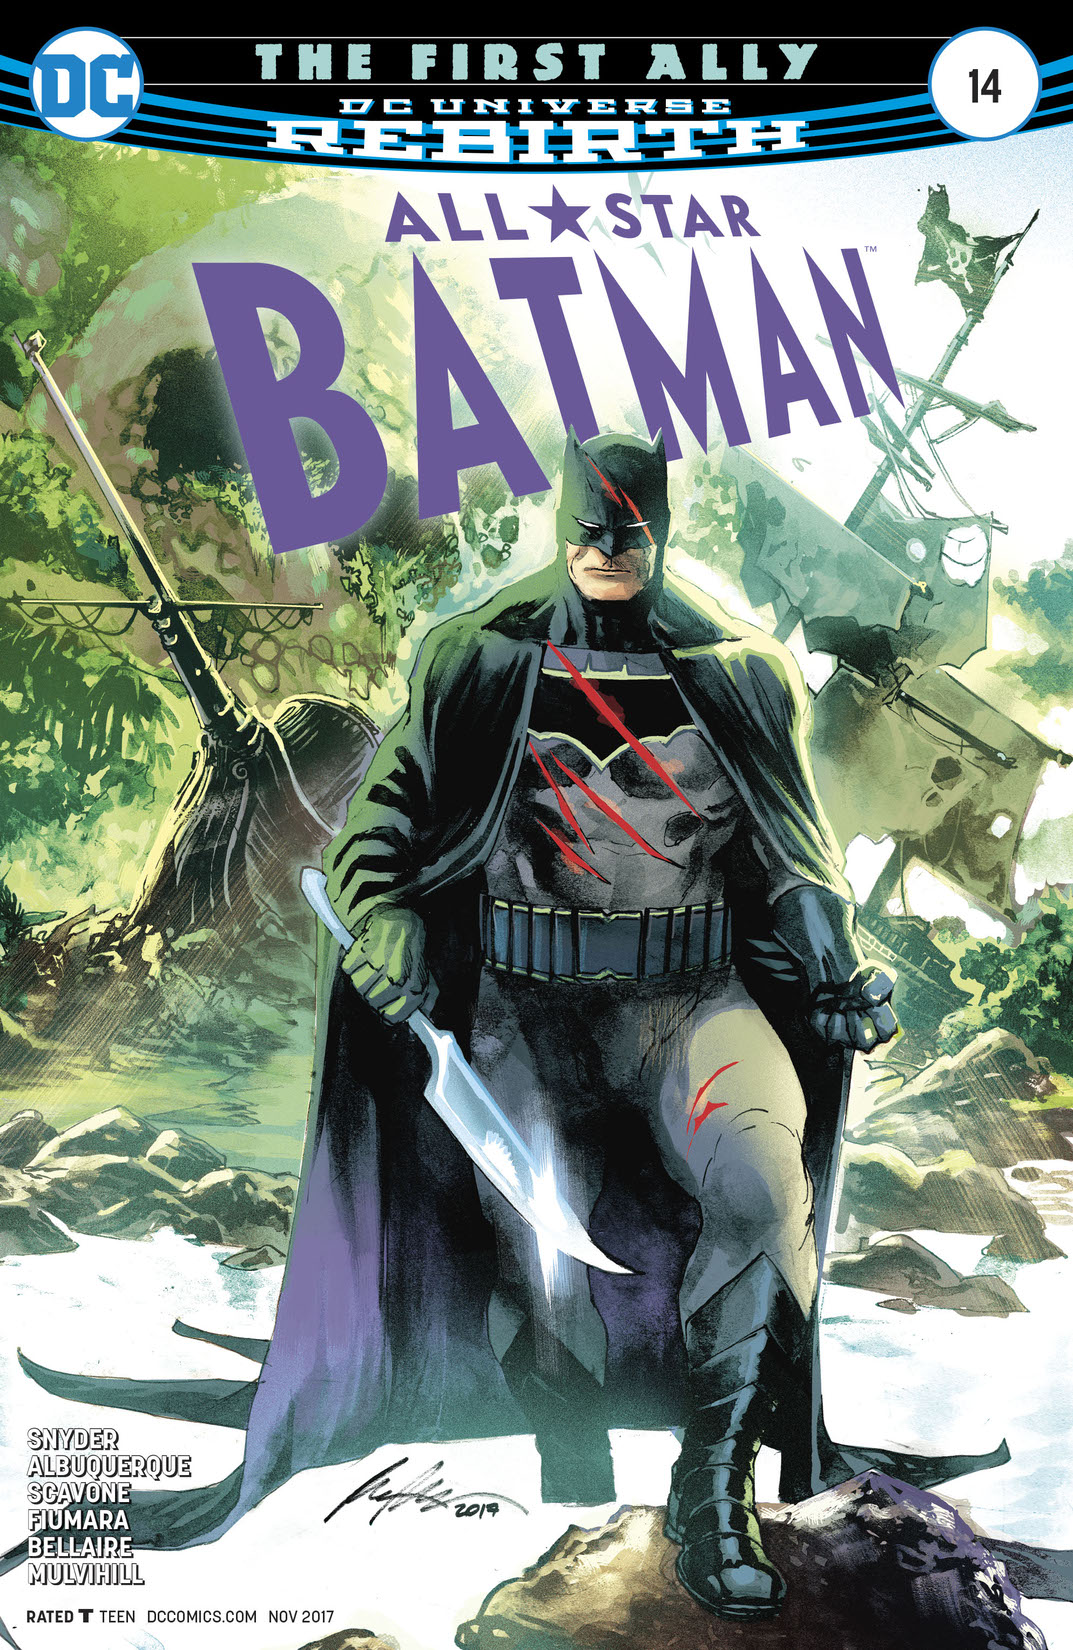 All Star Batman #14 preview images